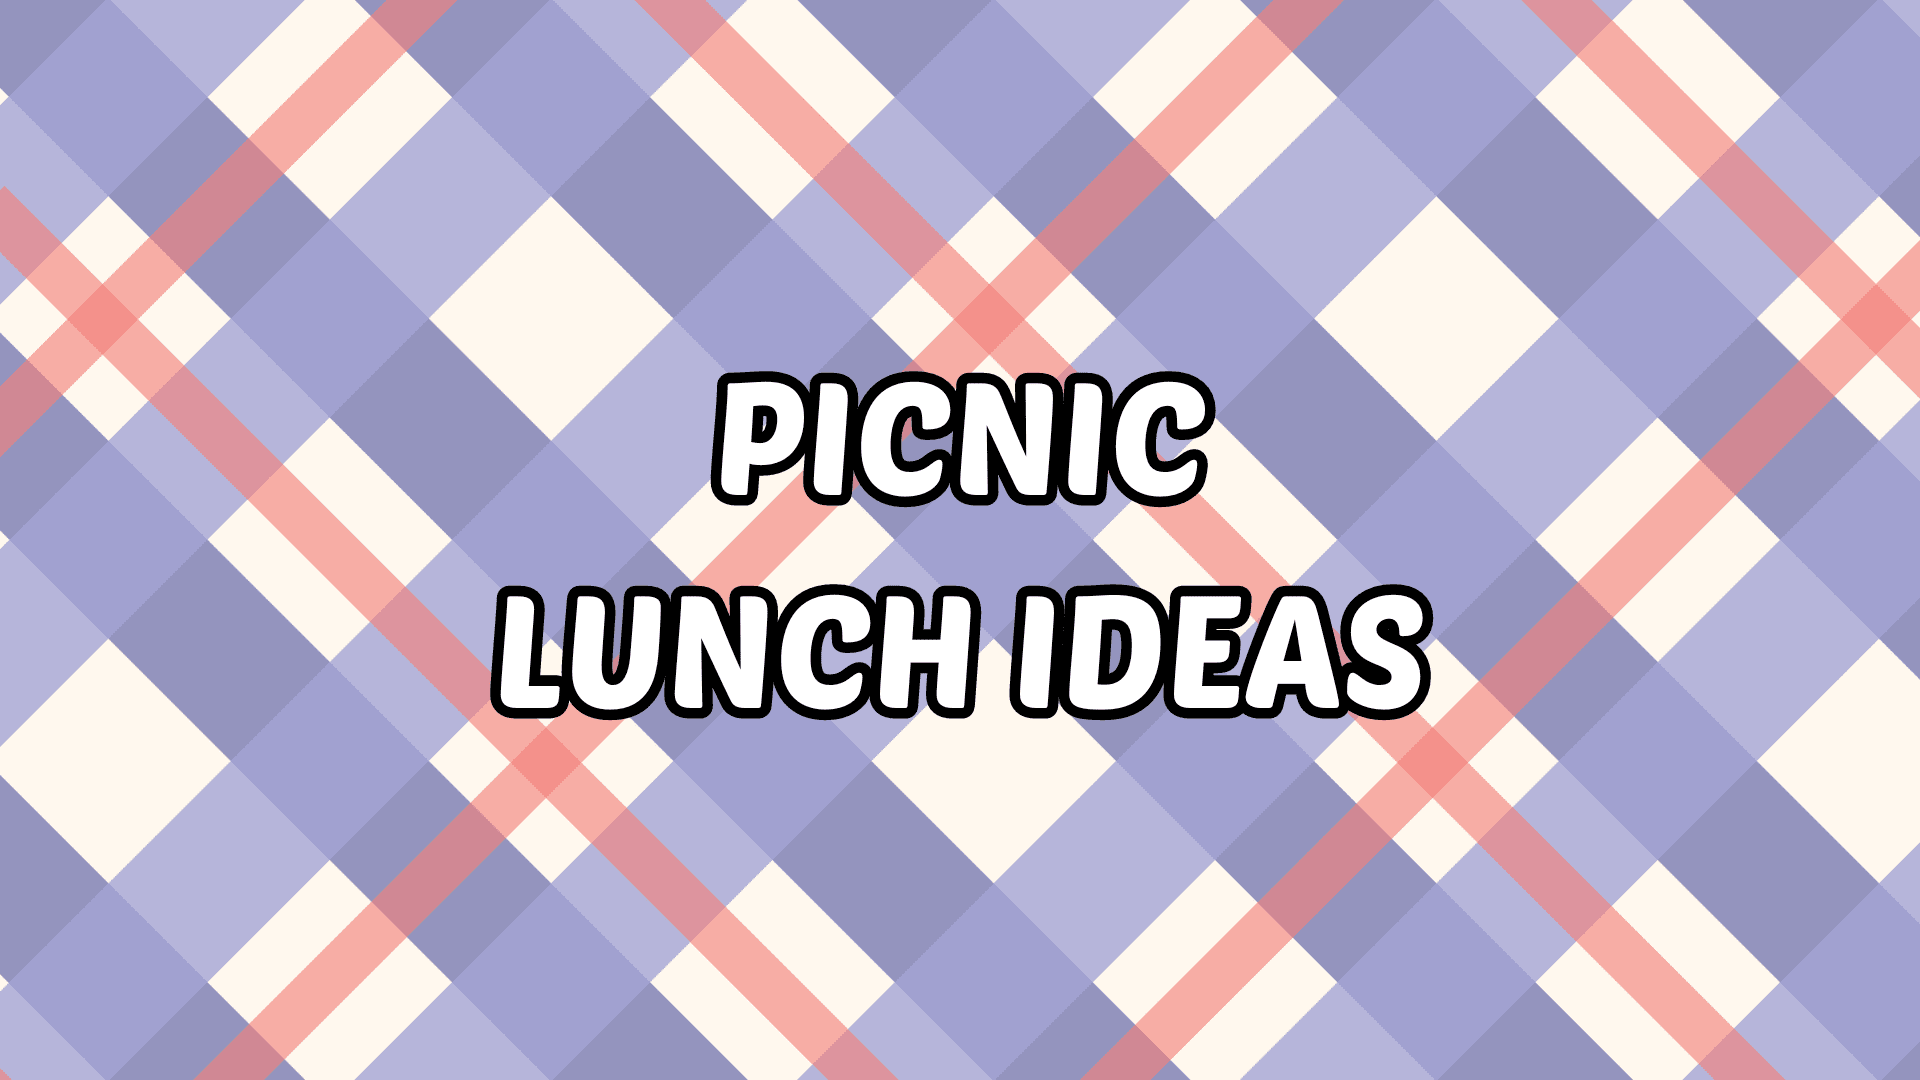 Picnic lunch ideas for kids against a purple, white, and red plaid picnic blanket background.